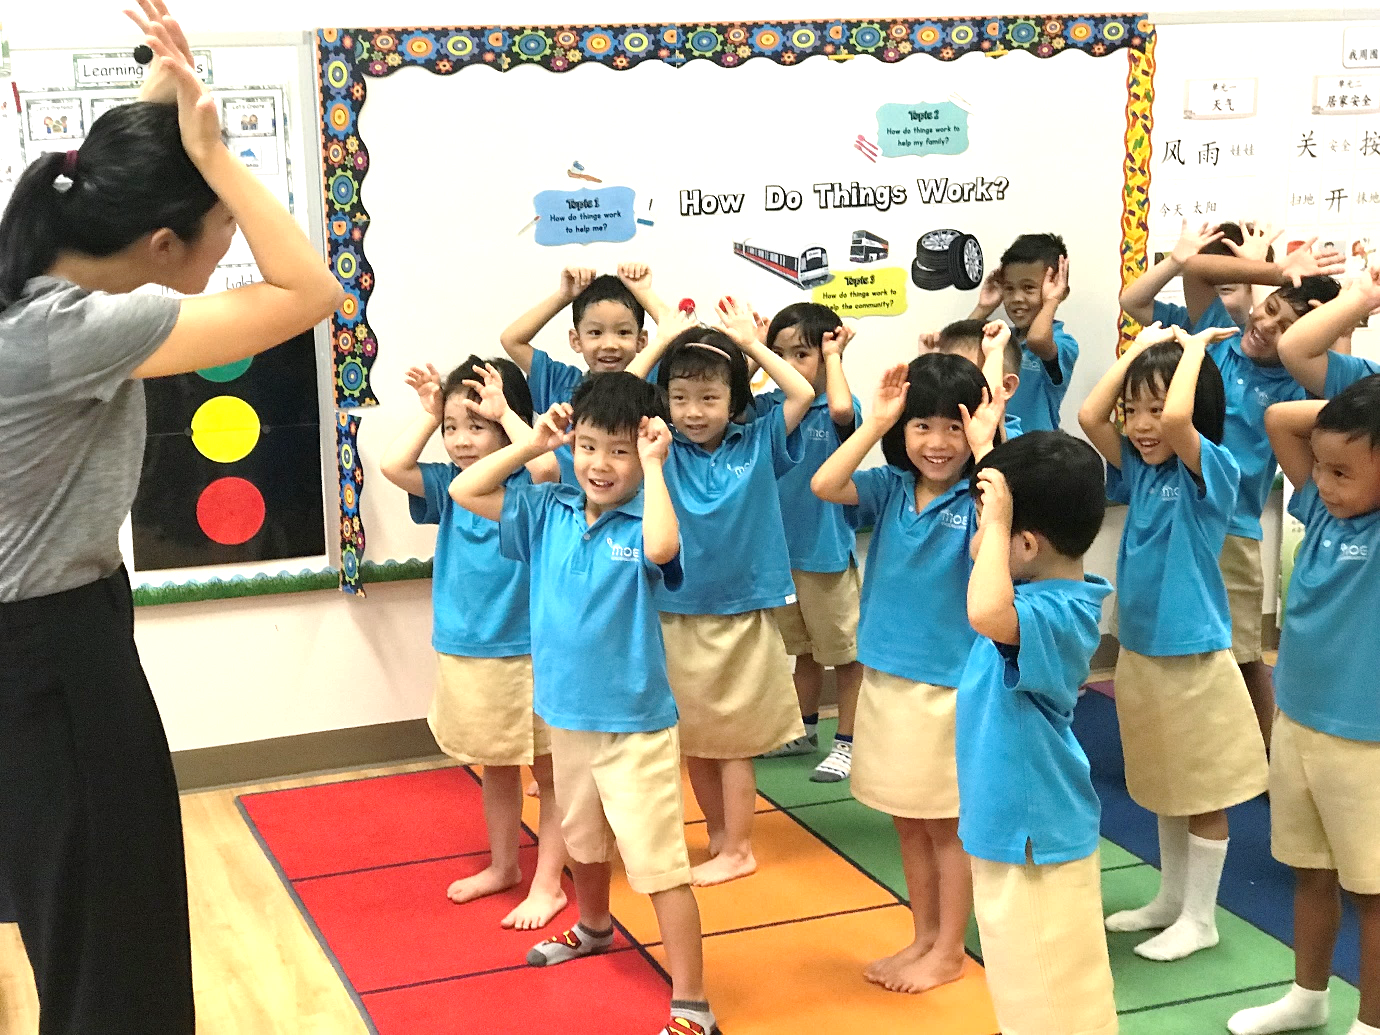 Using movements to signal routines